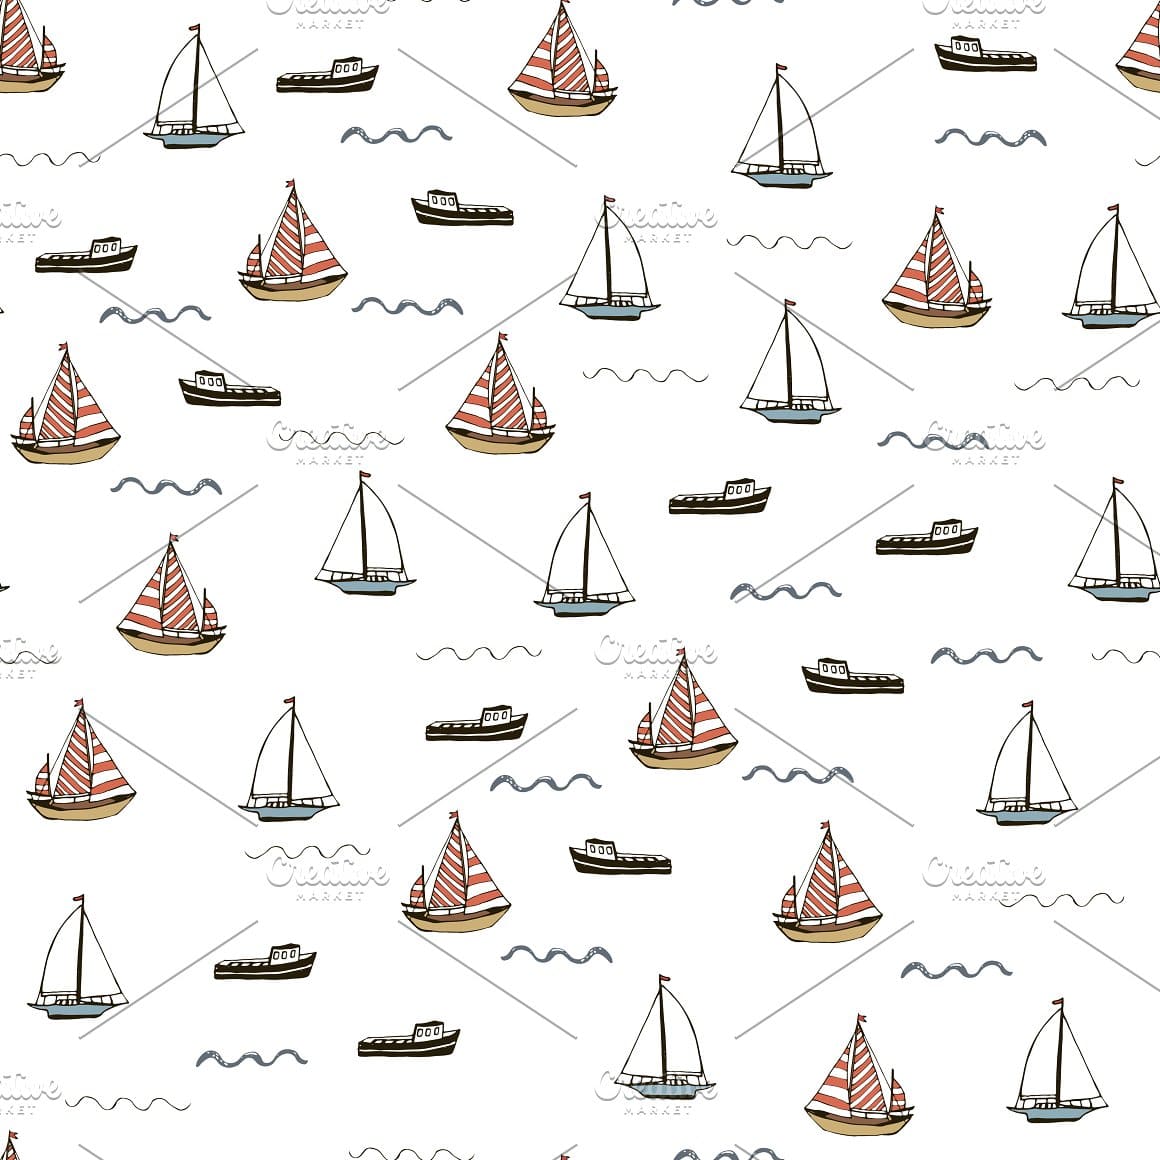 Yachts with white and striped sails, boats on a white background among the waves.